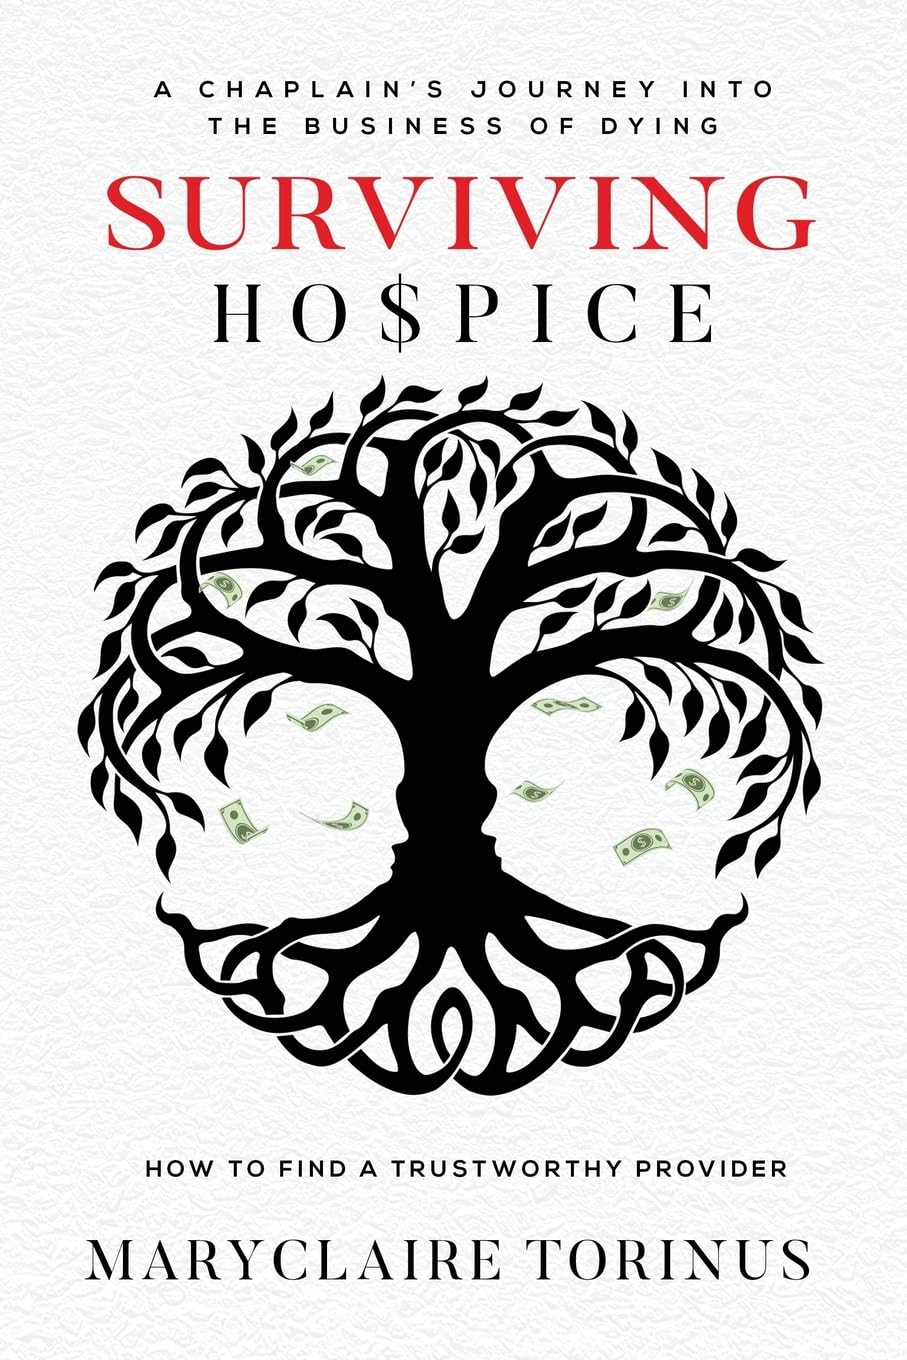 New book "Surviving Hospice" by Maryclaire Torinus is released, an informative examination of the hospice industry that combines personal experience and empirical data